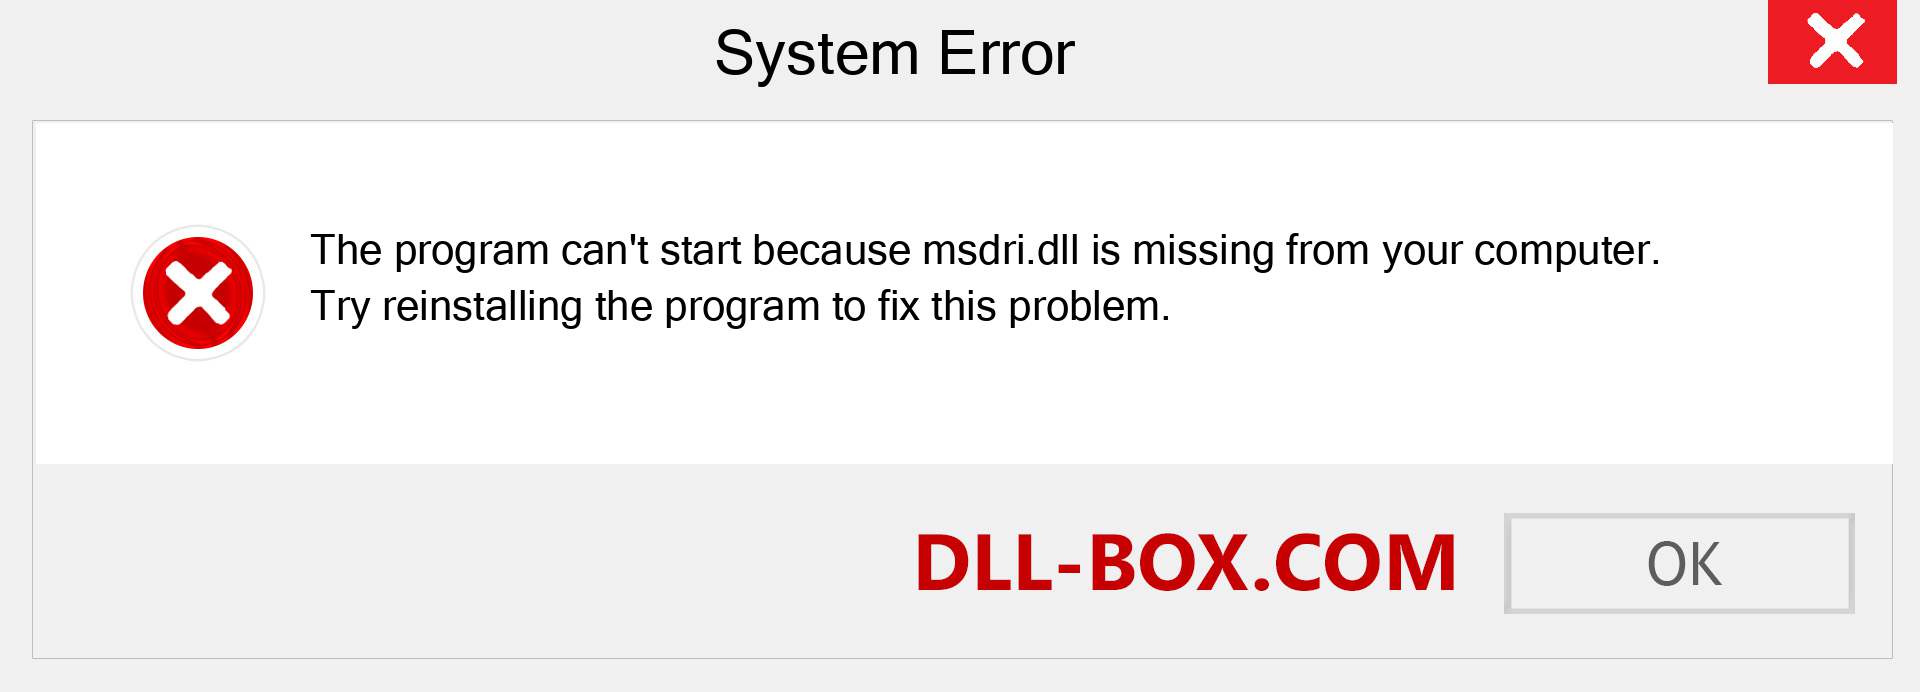  msdri.dll file is missing?. Download for Windows 7, 8, 10 - Fix  msdri dll Missing Error on Windows, photos, images